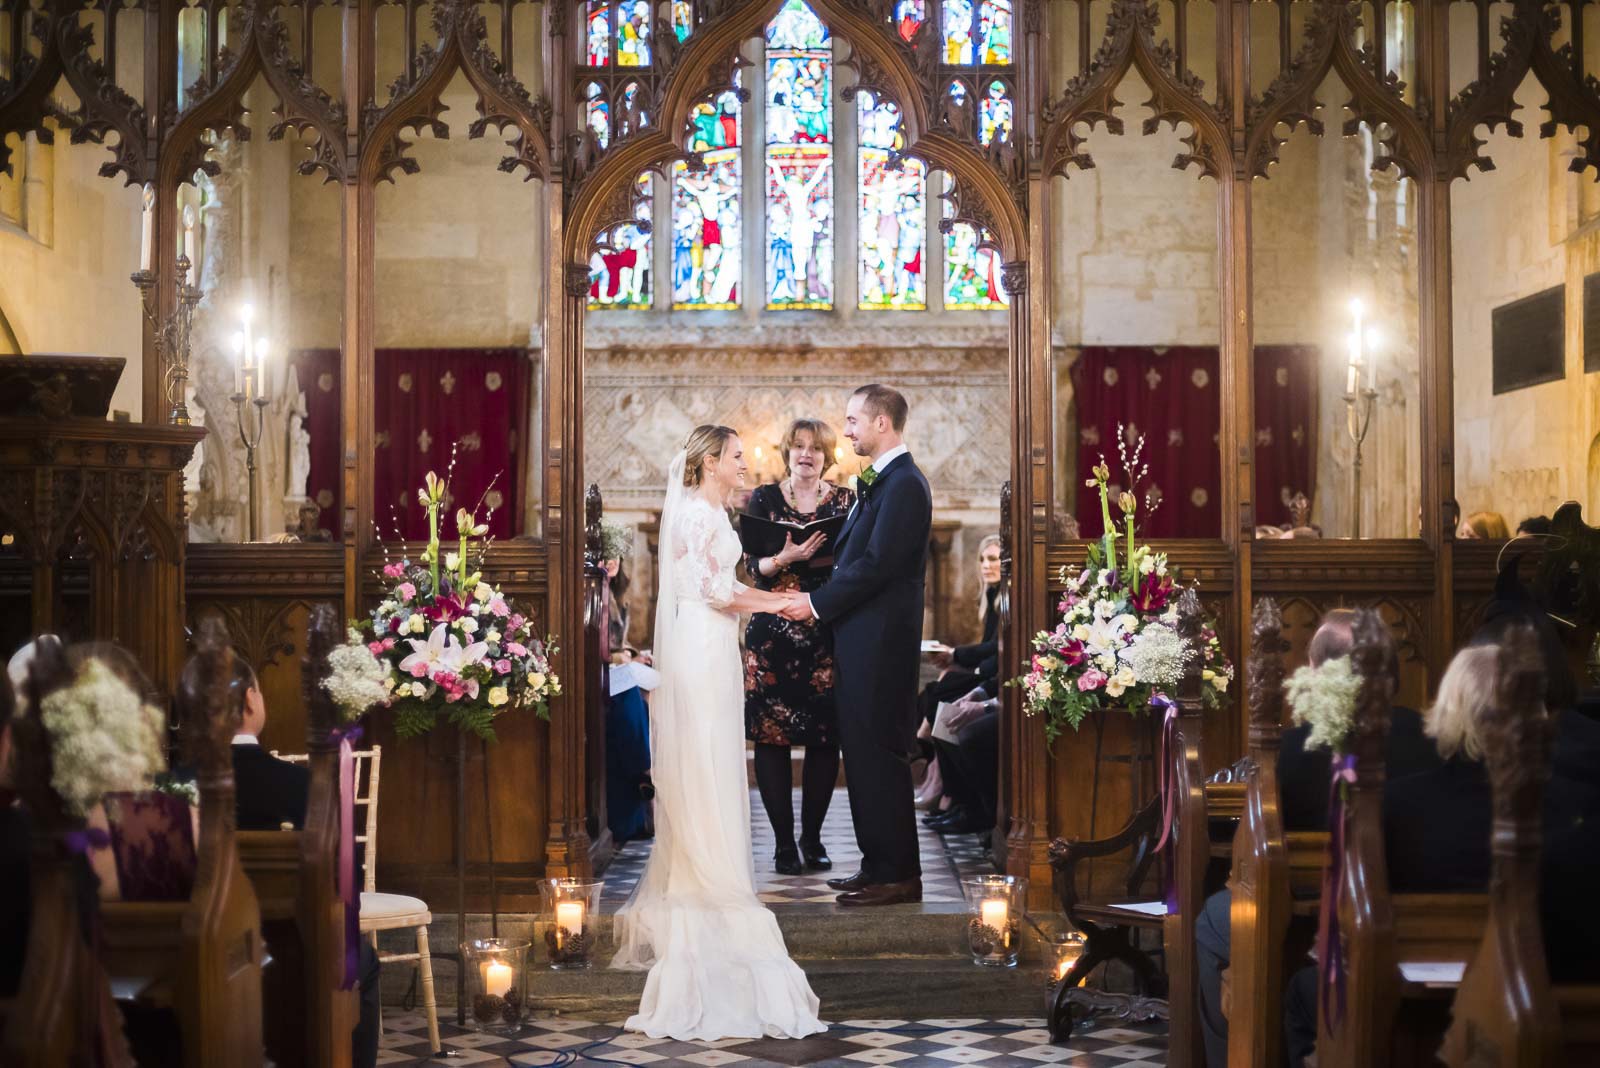 The beautiful wedding ceremony in Sudeley Castle's Chapel